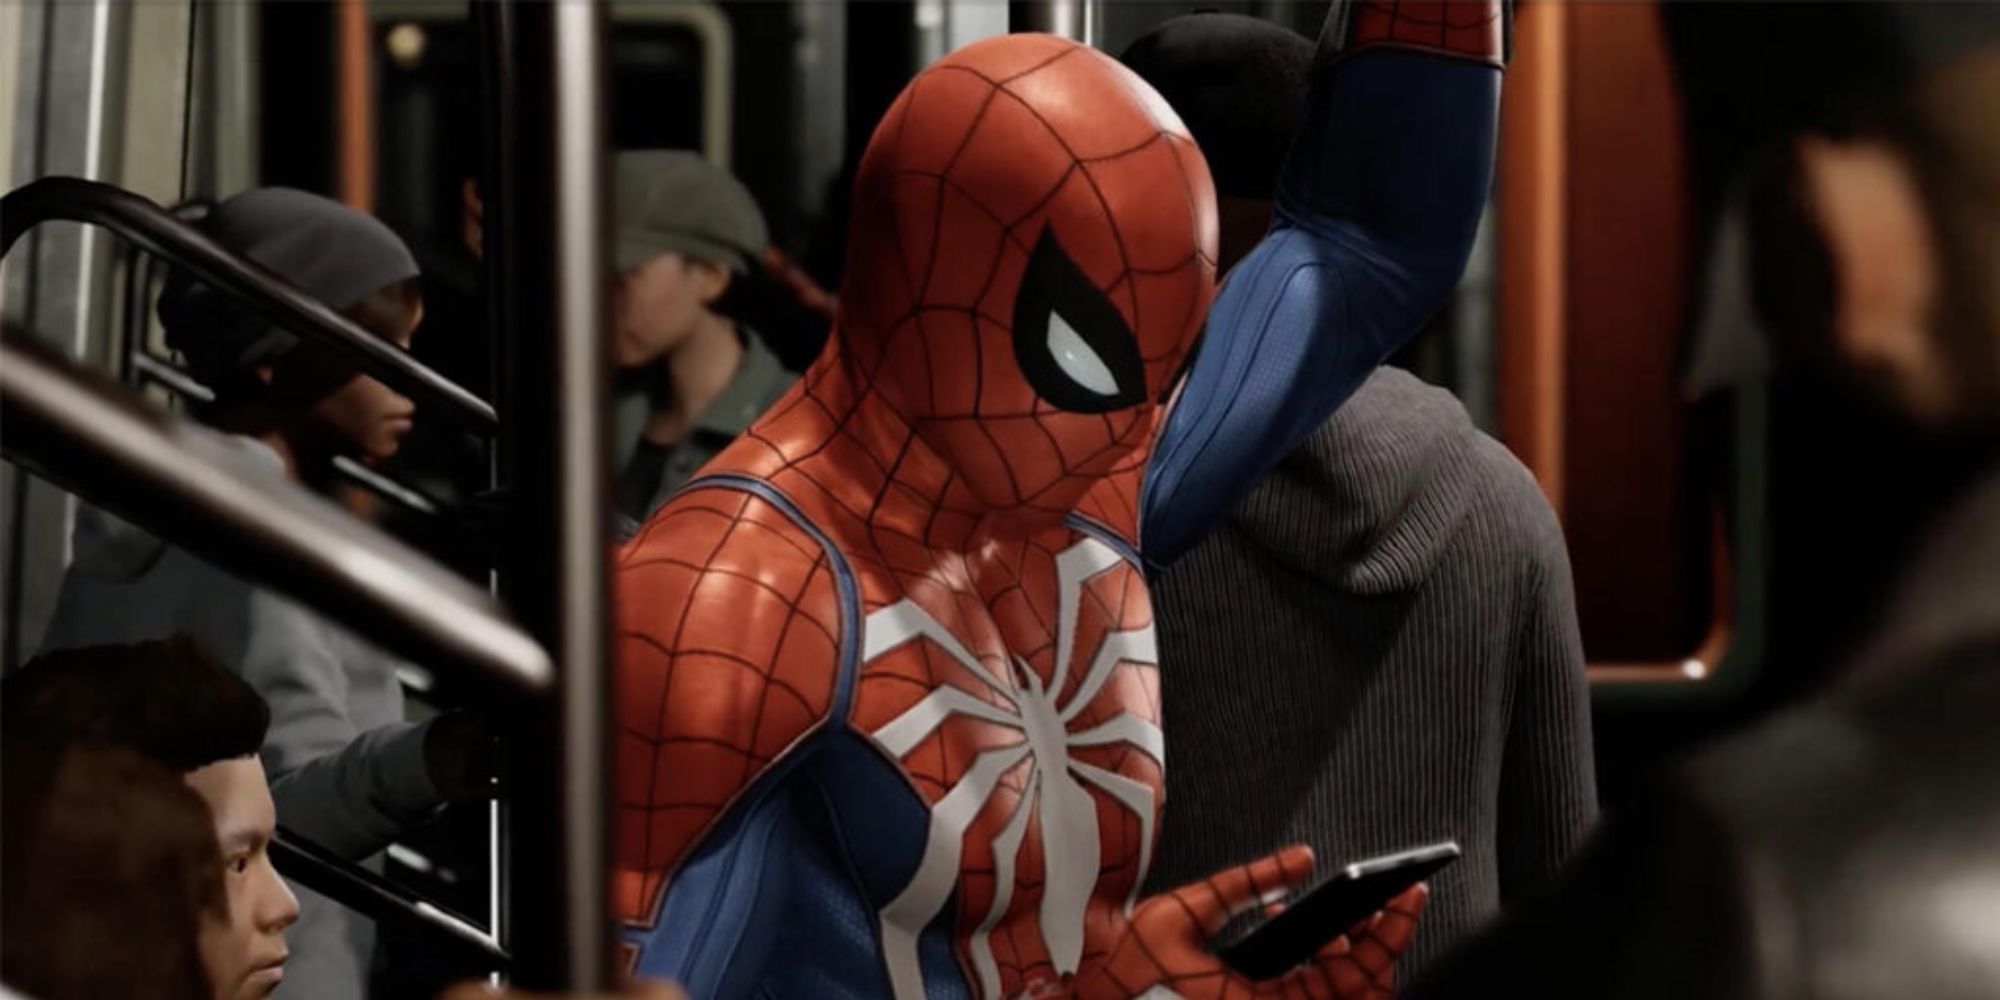 Spider-Man on his phone during a loading screen.